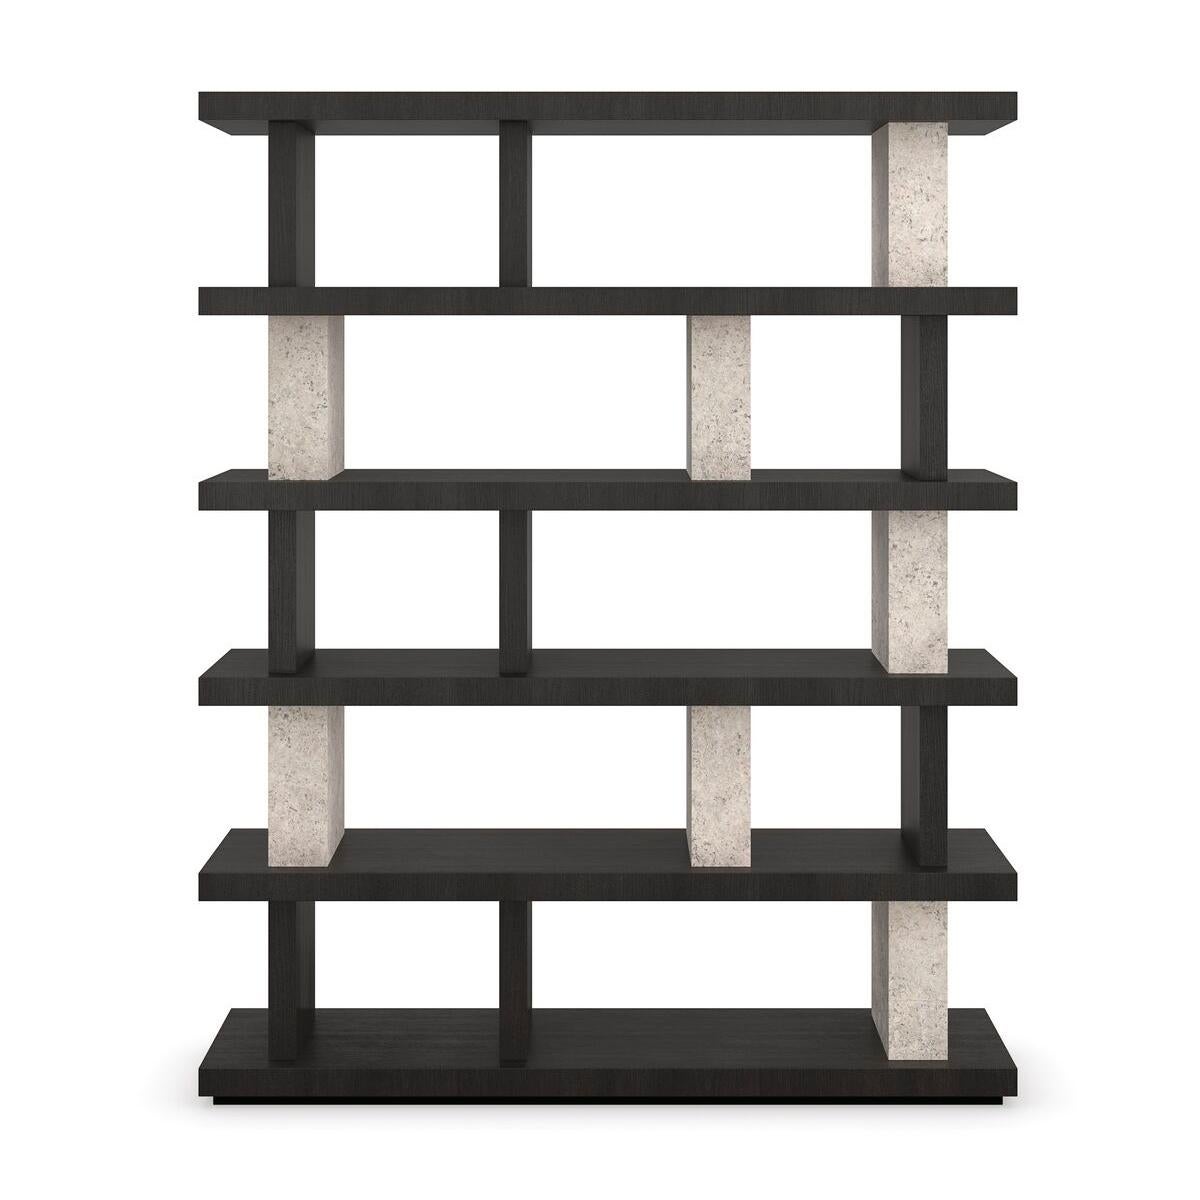 A striking contrast of tone and texture, this bold modern design embodies sophistication from simplicity. Open Pore Travertine adds an organic element, punctuated by quarter-sawn oak shelves and dividers in a dramatic Cinder finish. Its tall,